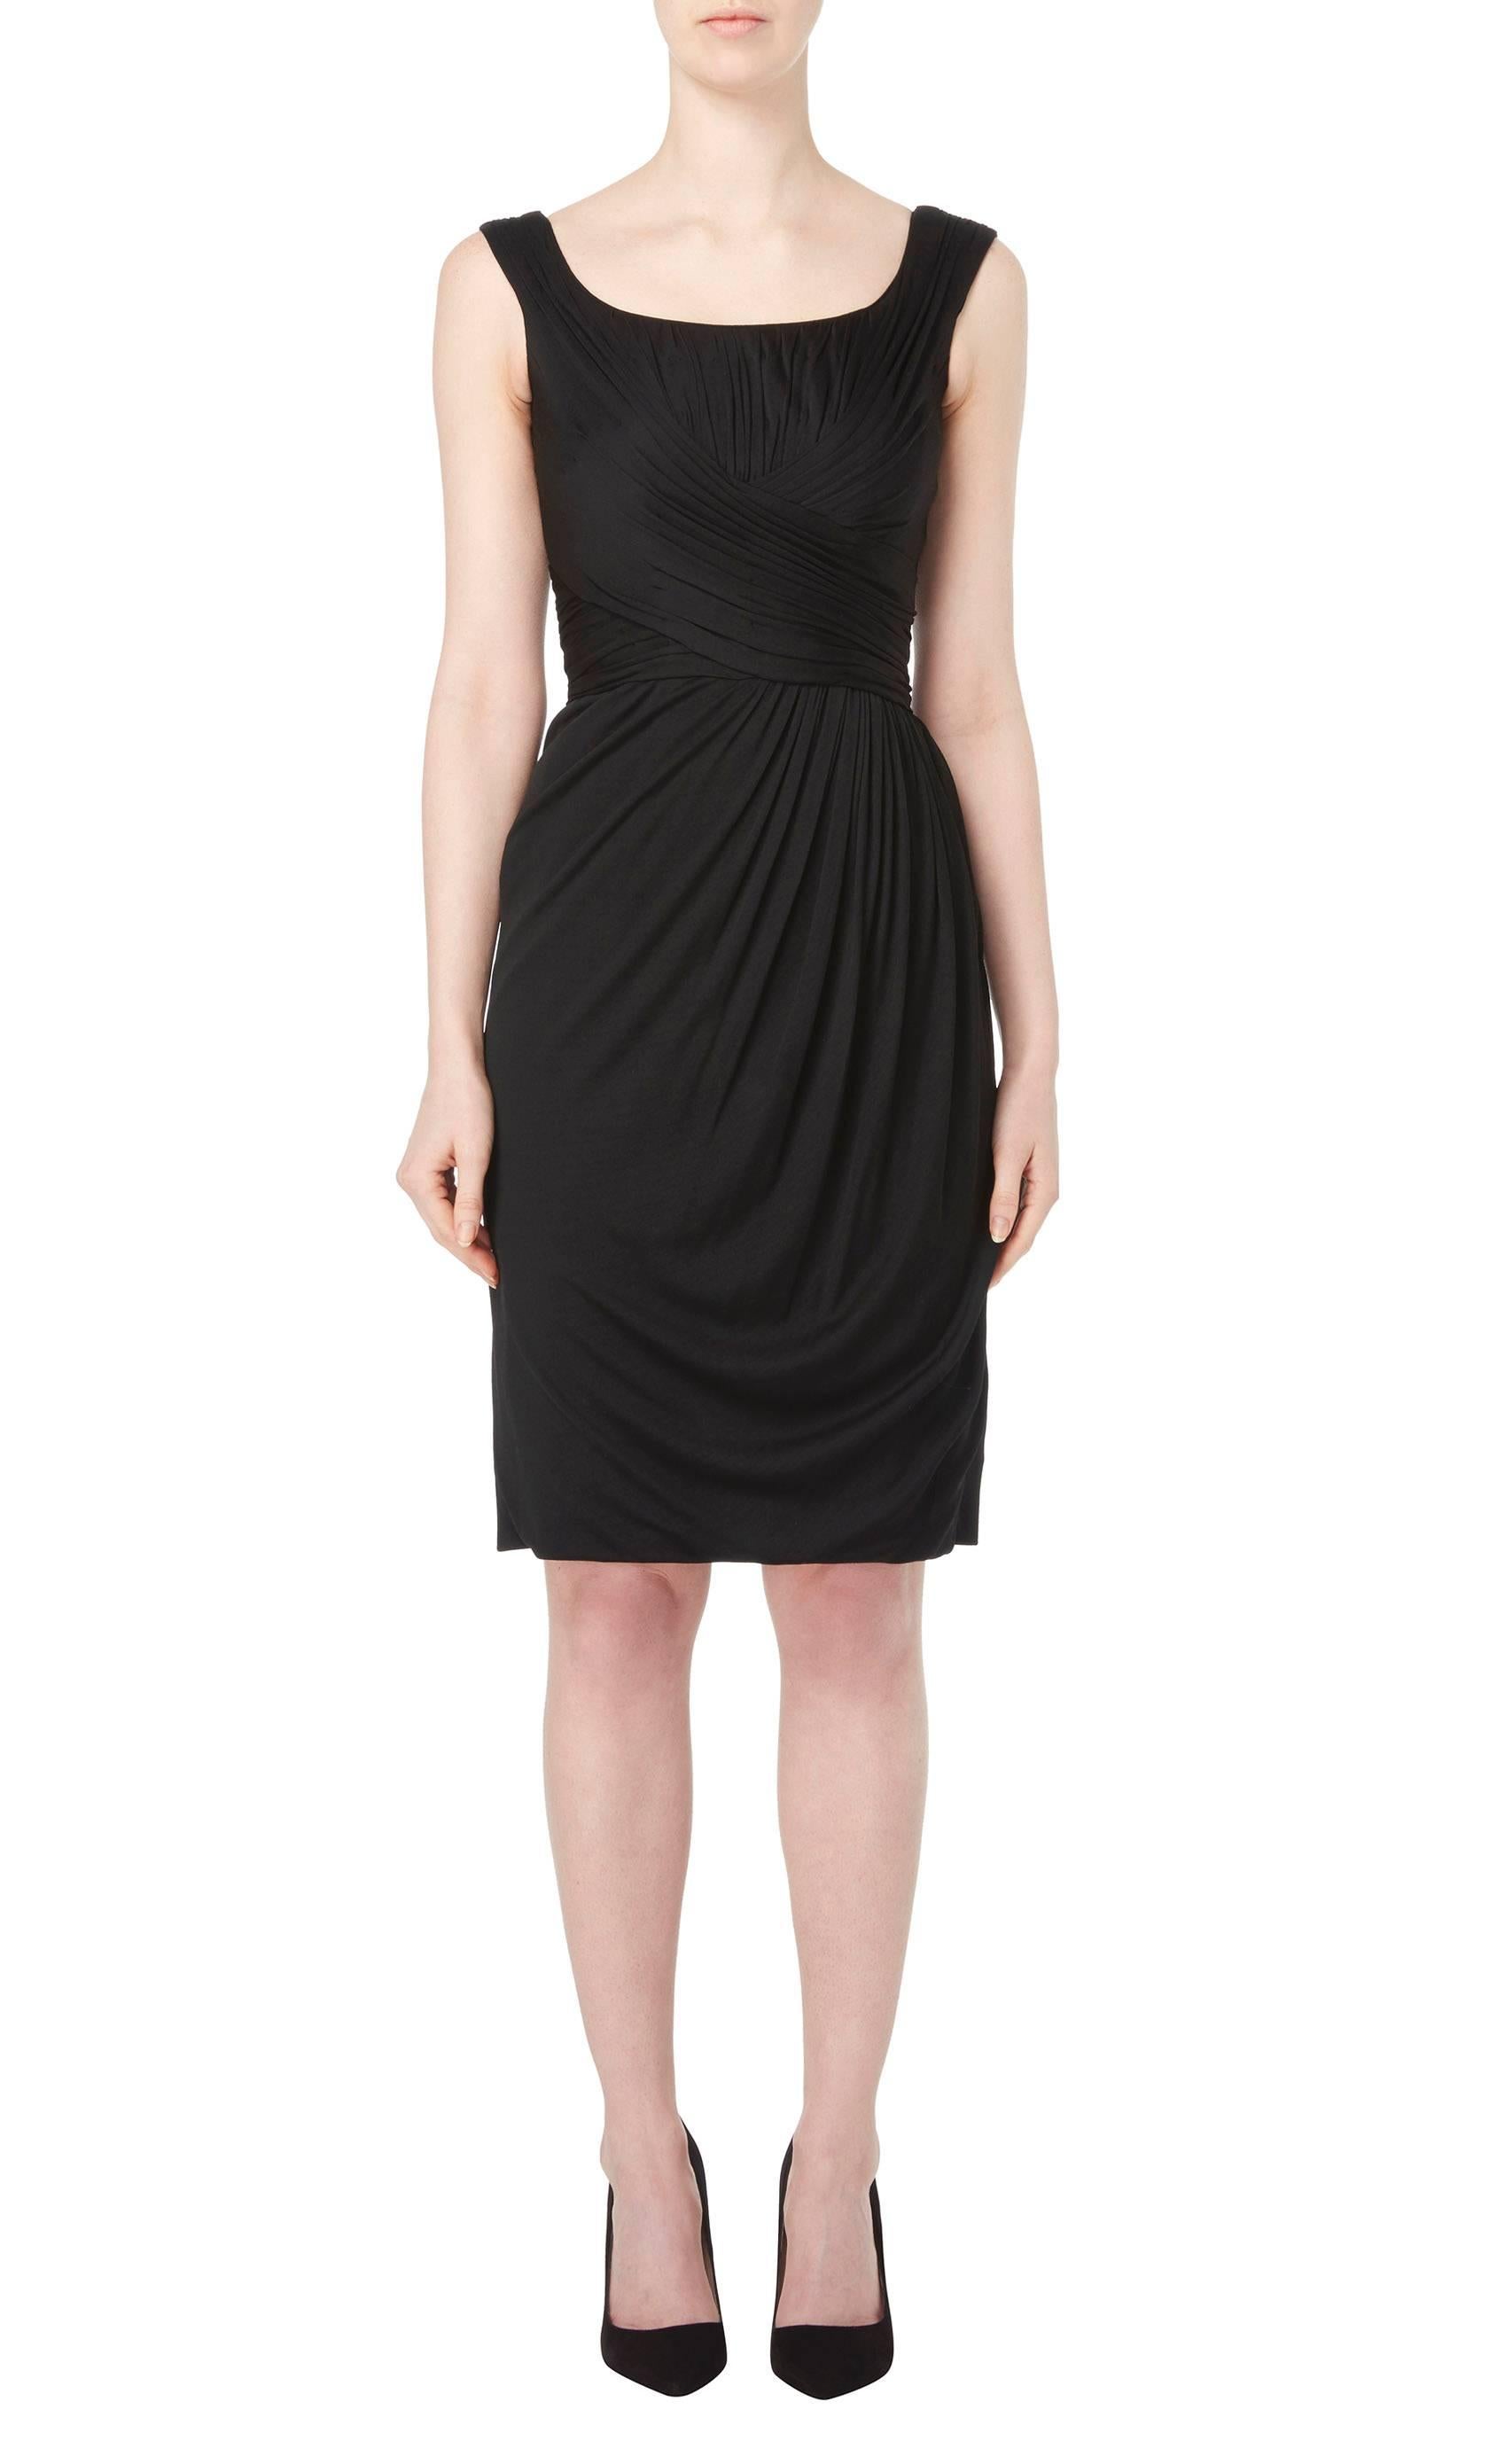 This chic LBD is truly timeless and the perfect way of introducing vintage into a modern wardrobe. The pleating detail crosses over on the bodice, accentuating the waist, and the silk jersey drapes softly into the front of the skirt. The flattering